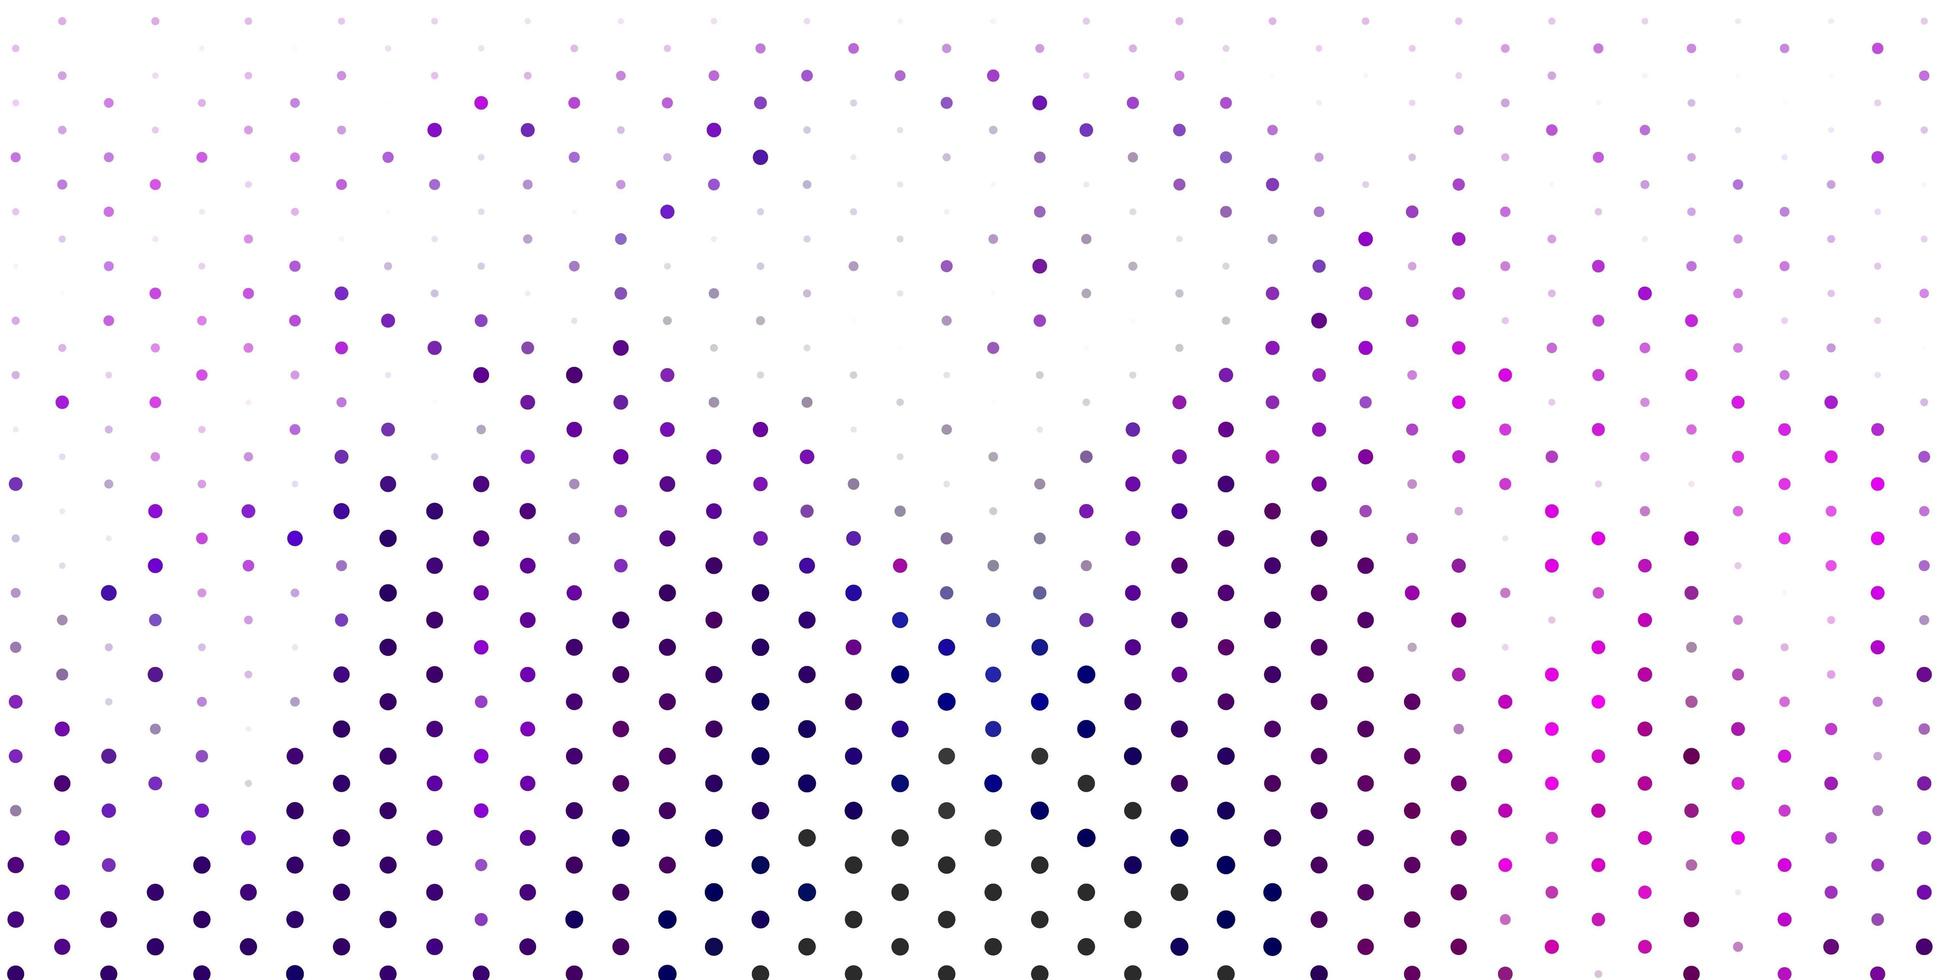 Light purple vector layout with circle shapes